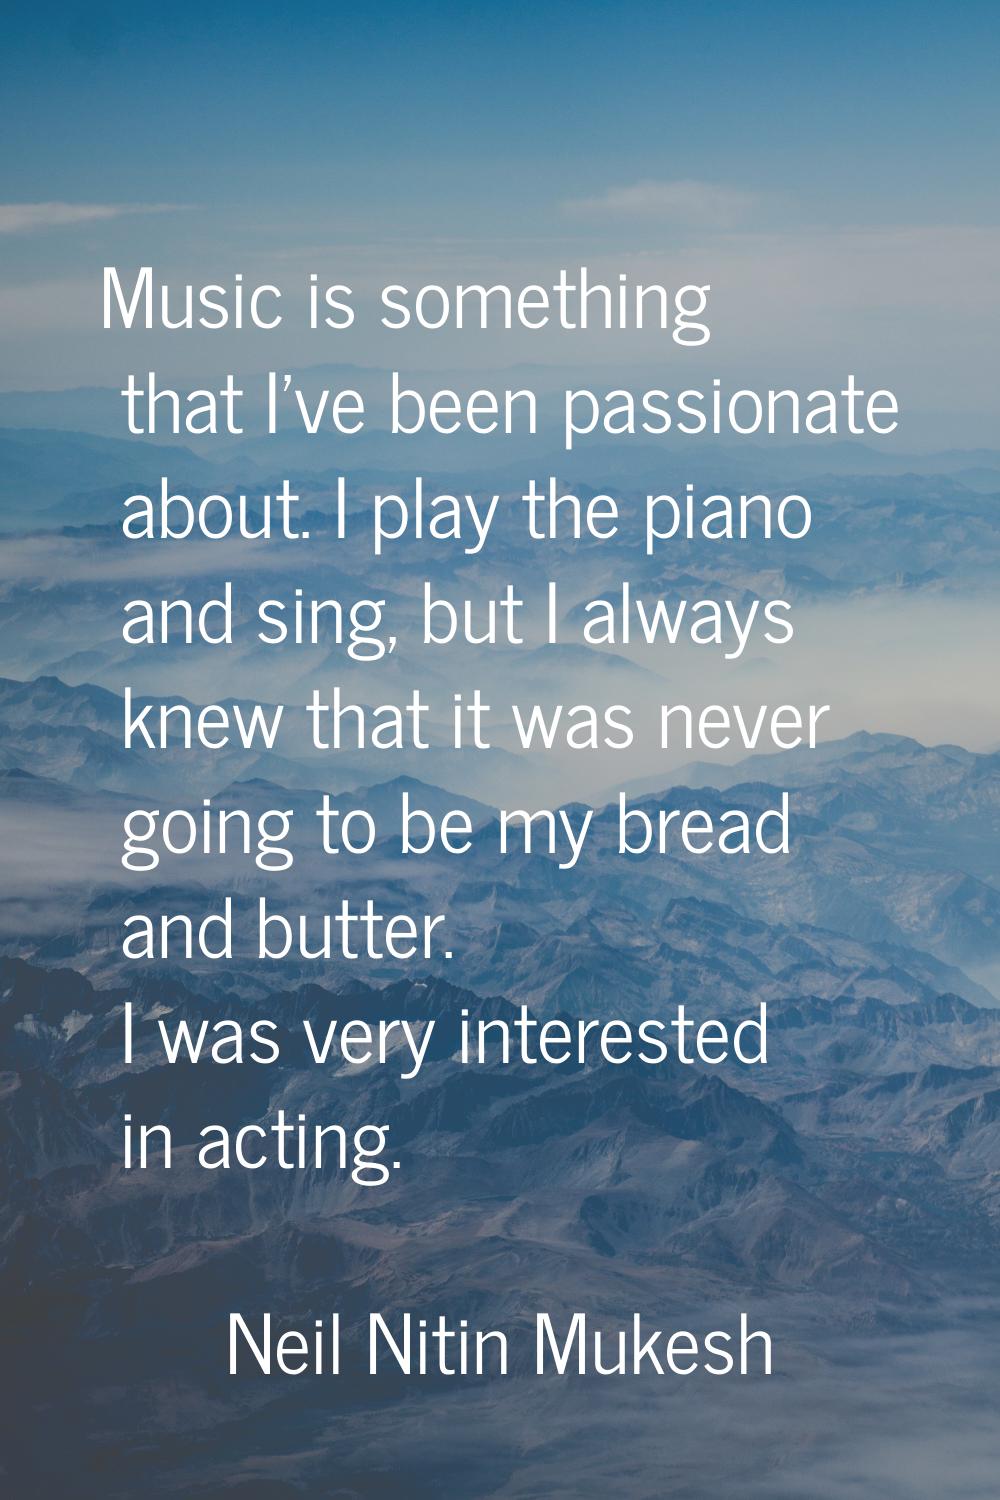 Music is something that I've been passionate about. I play the piano and sing, but I always knew th